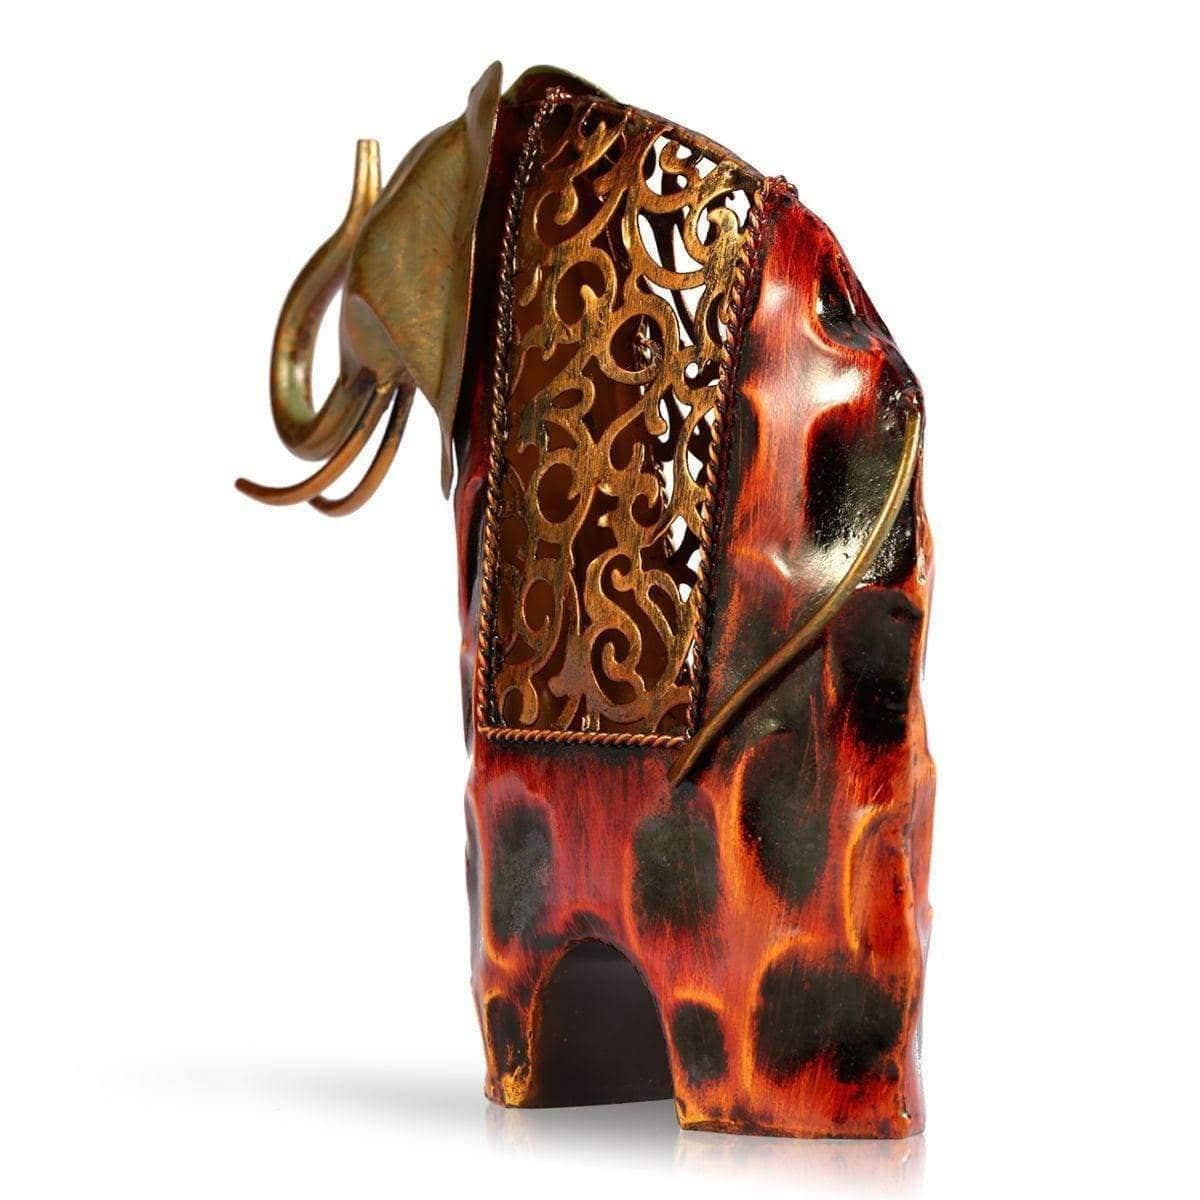 Carved Elephant Figurine Decor - Wild Touch for Your Space